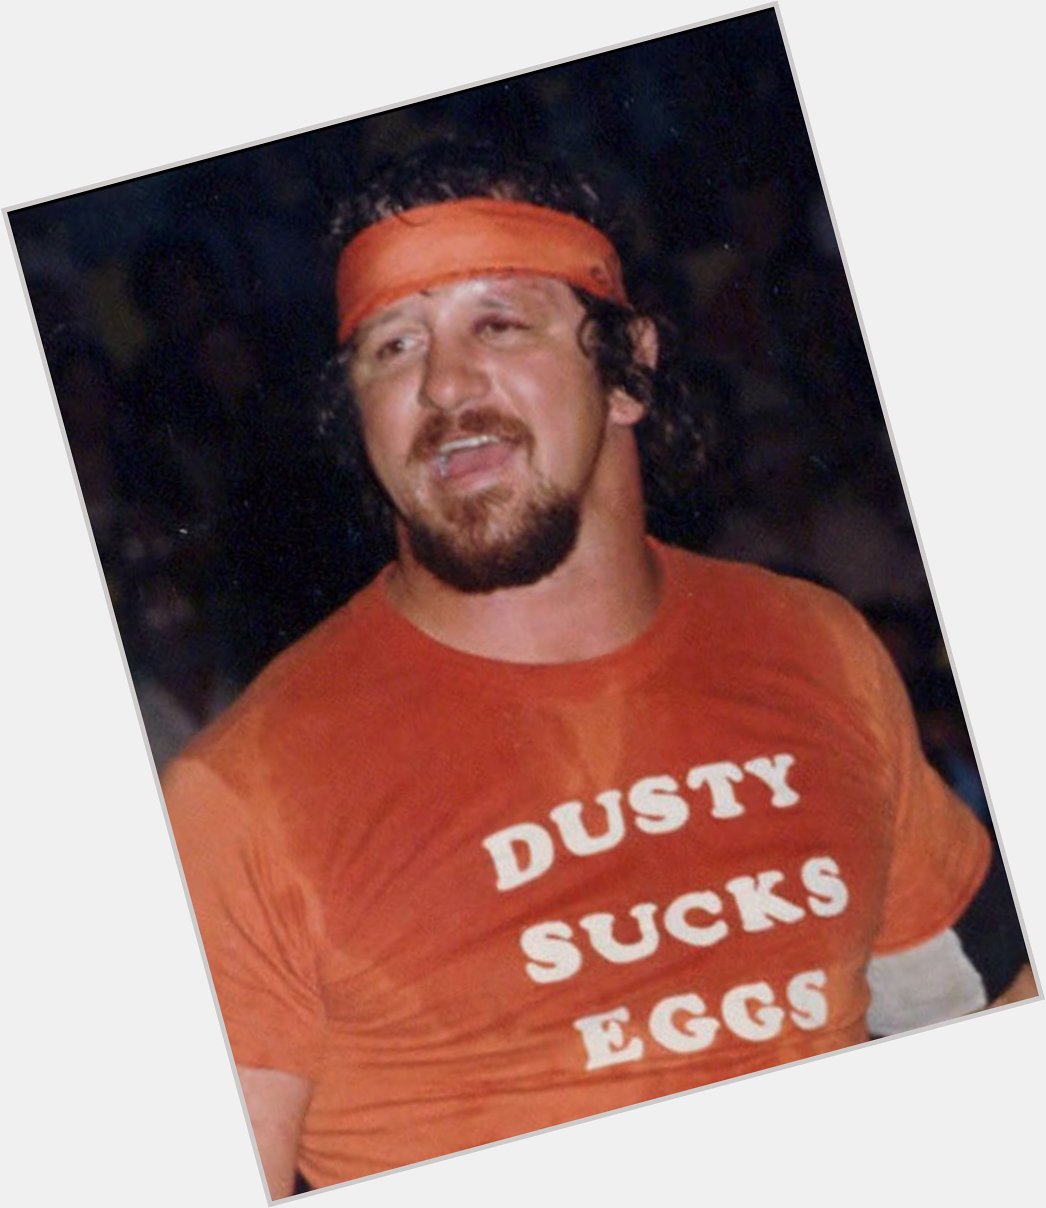 Happy Birthday to the GOAT, Terry Funk. 